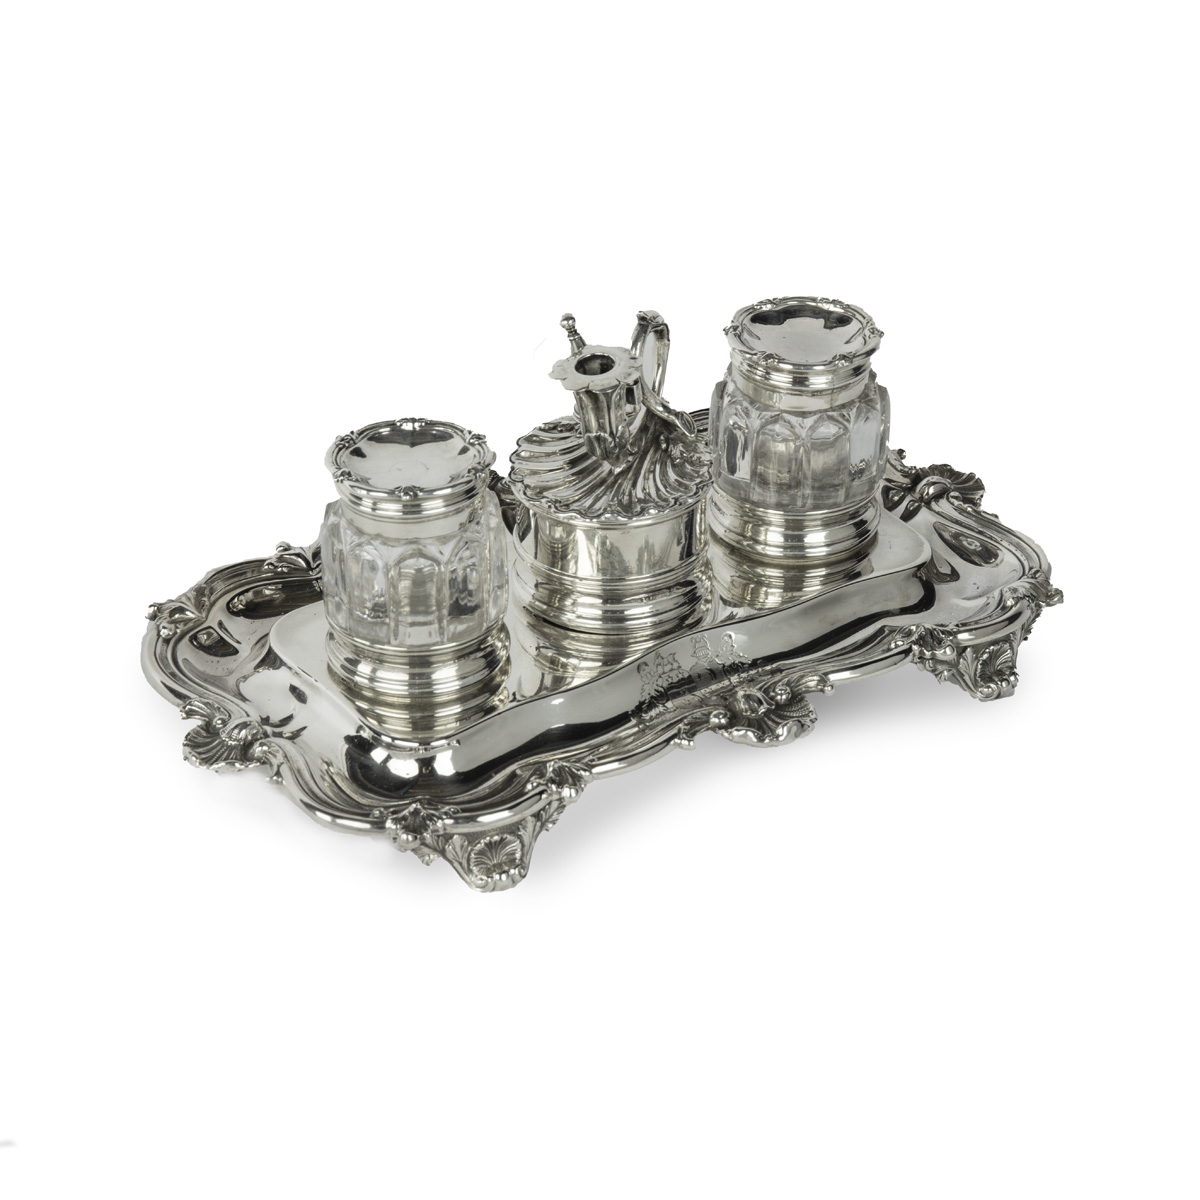 The early Victorian silver Rococo Revival inkstand of General Charles Nepean